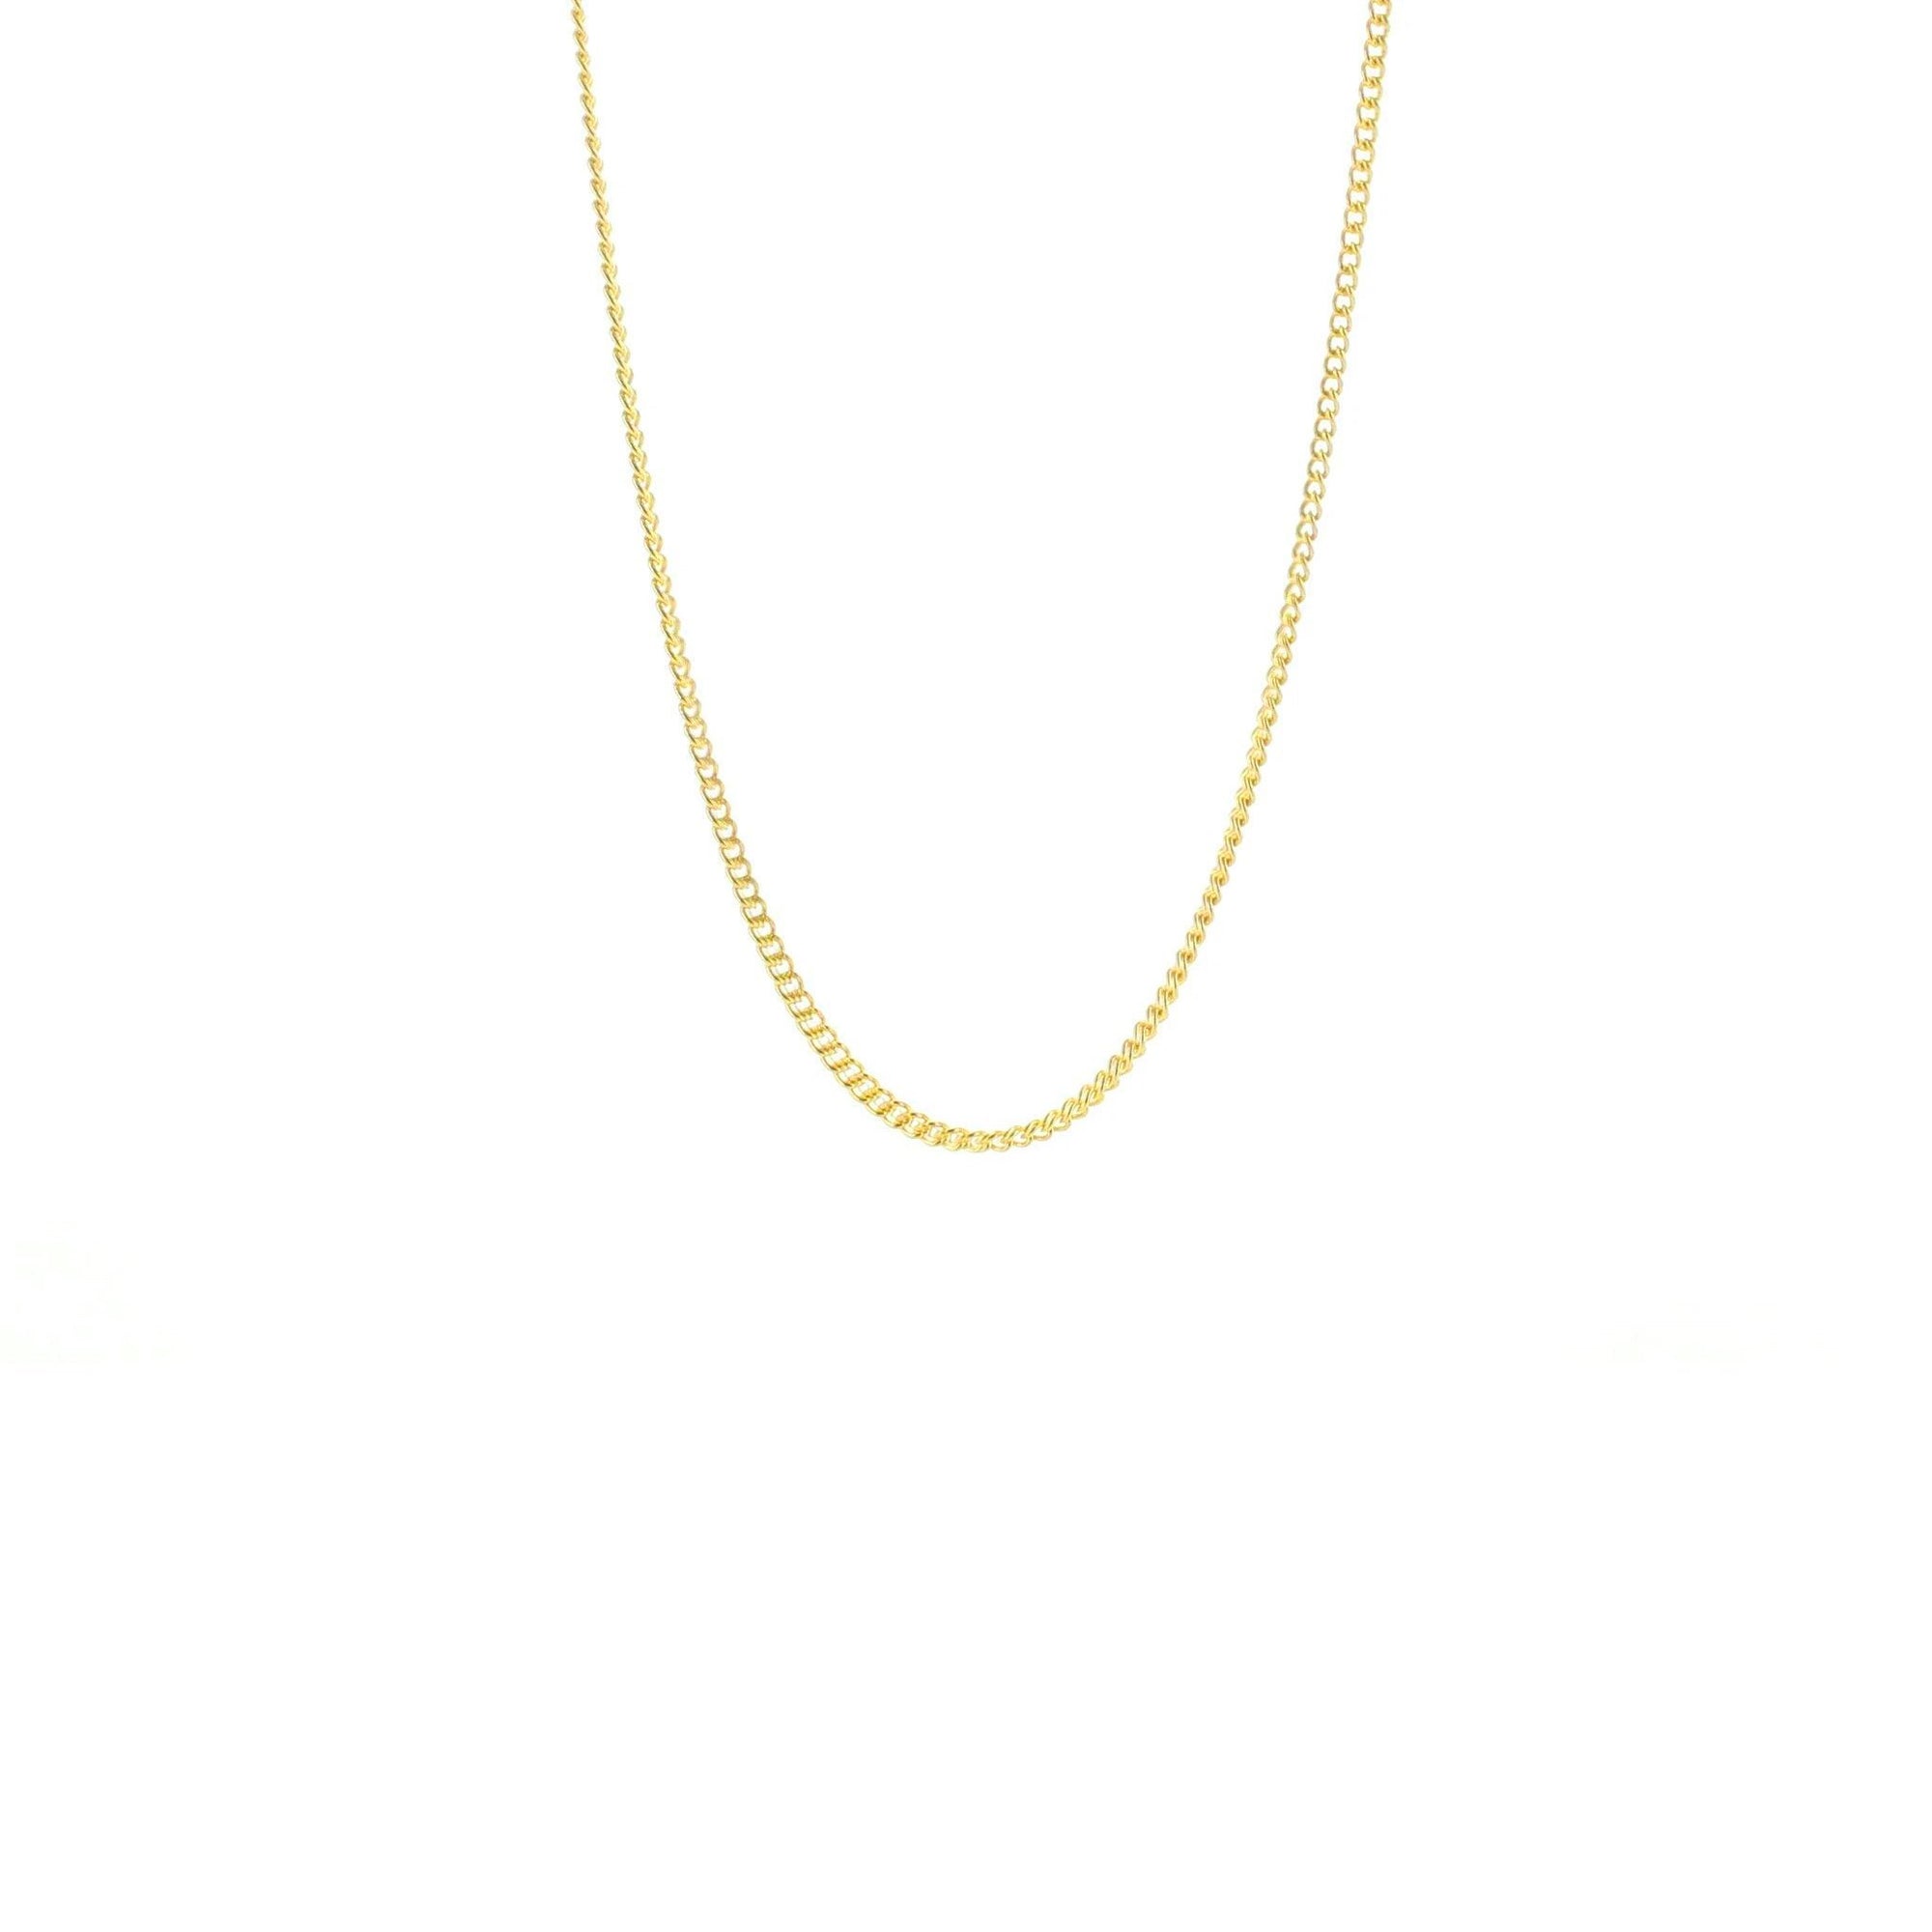 CHARMING 18-20" NECKLACE GOLD - SO PRETTY CARA COTTER